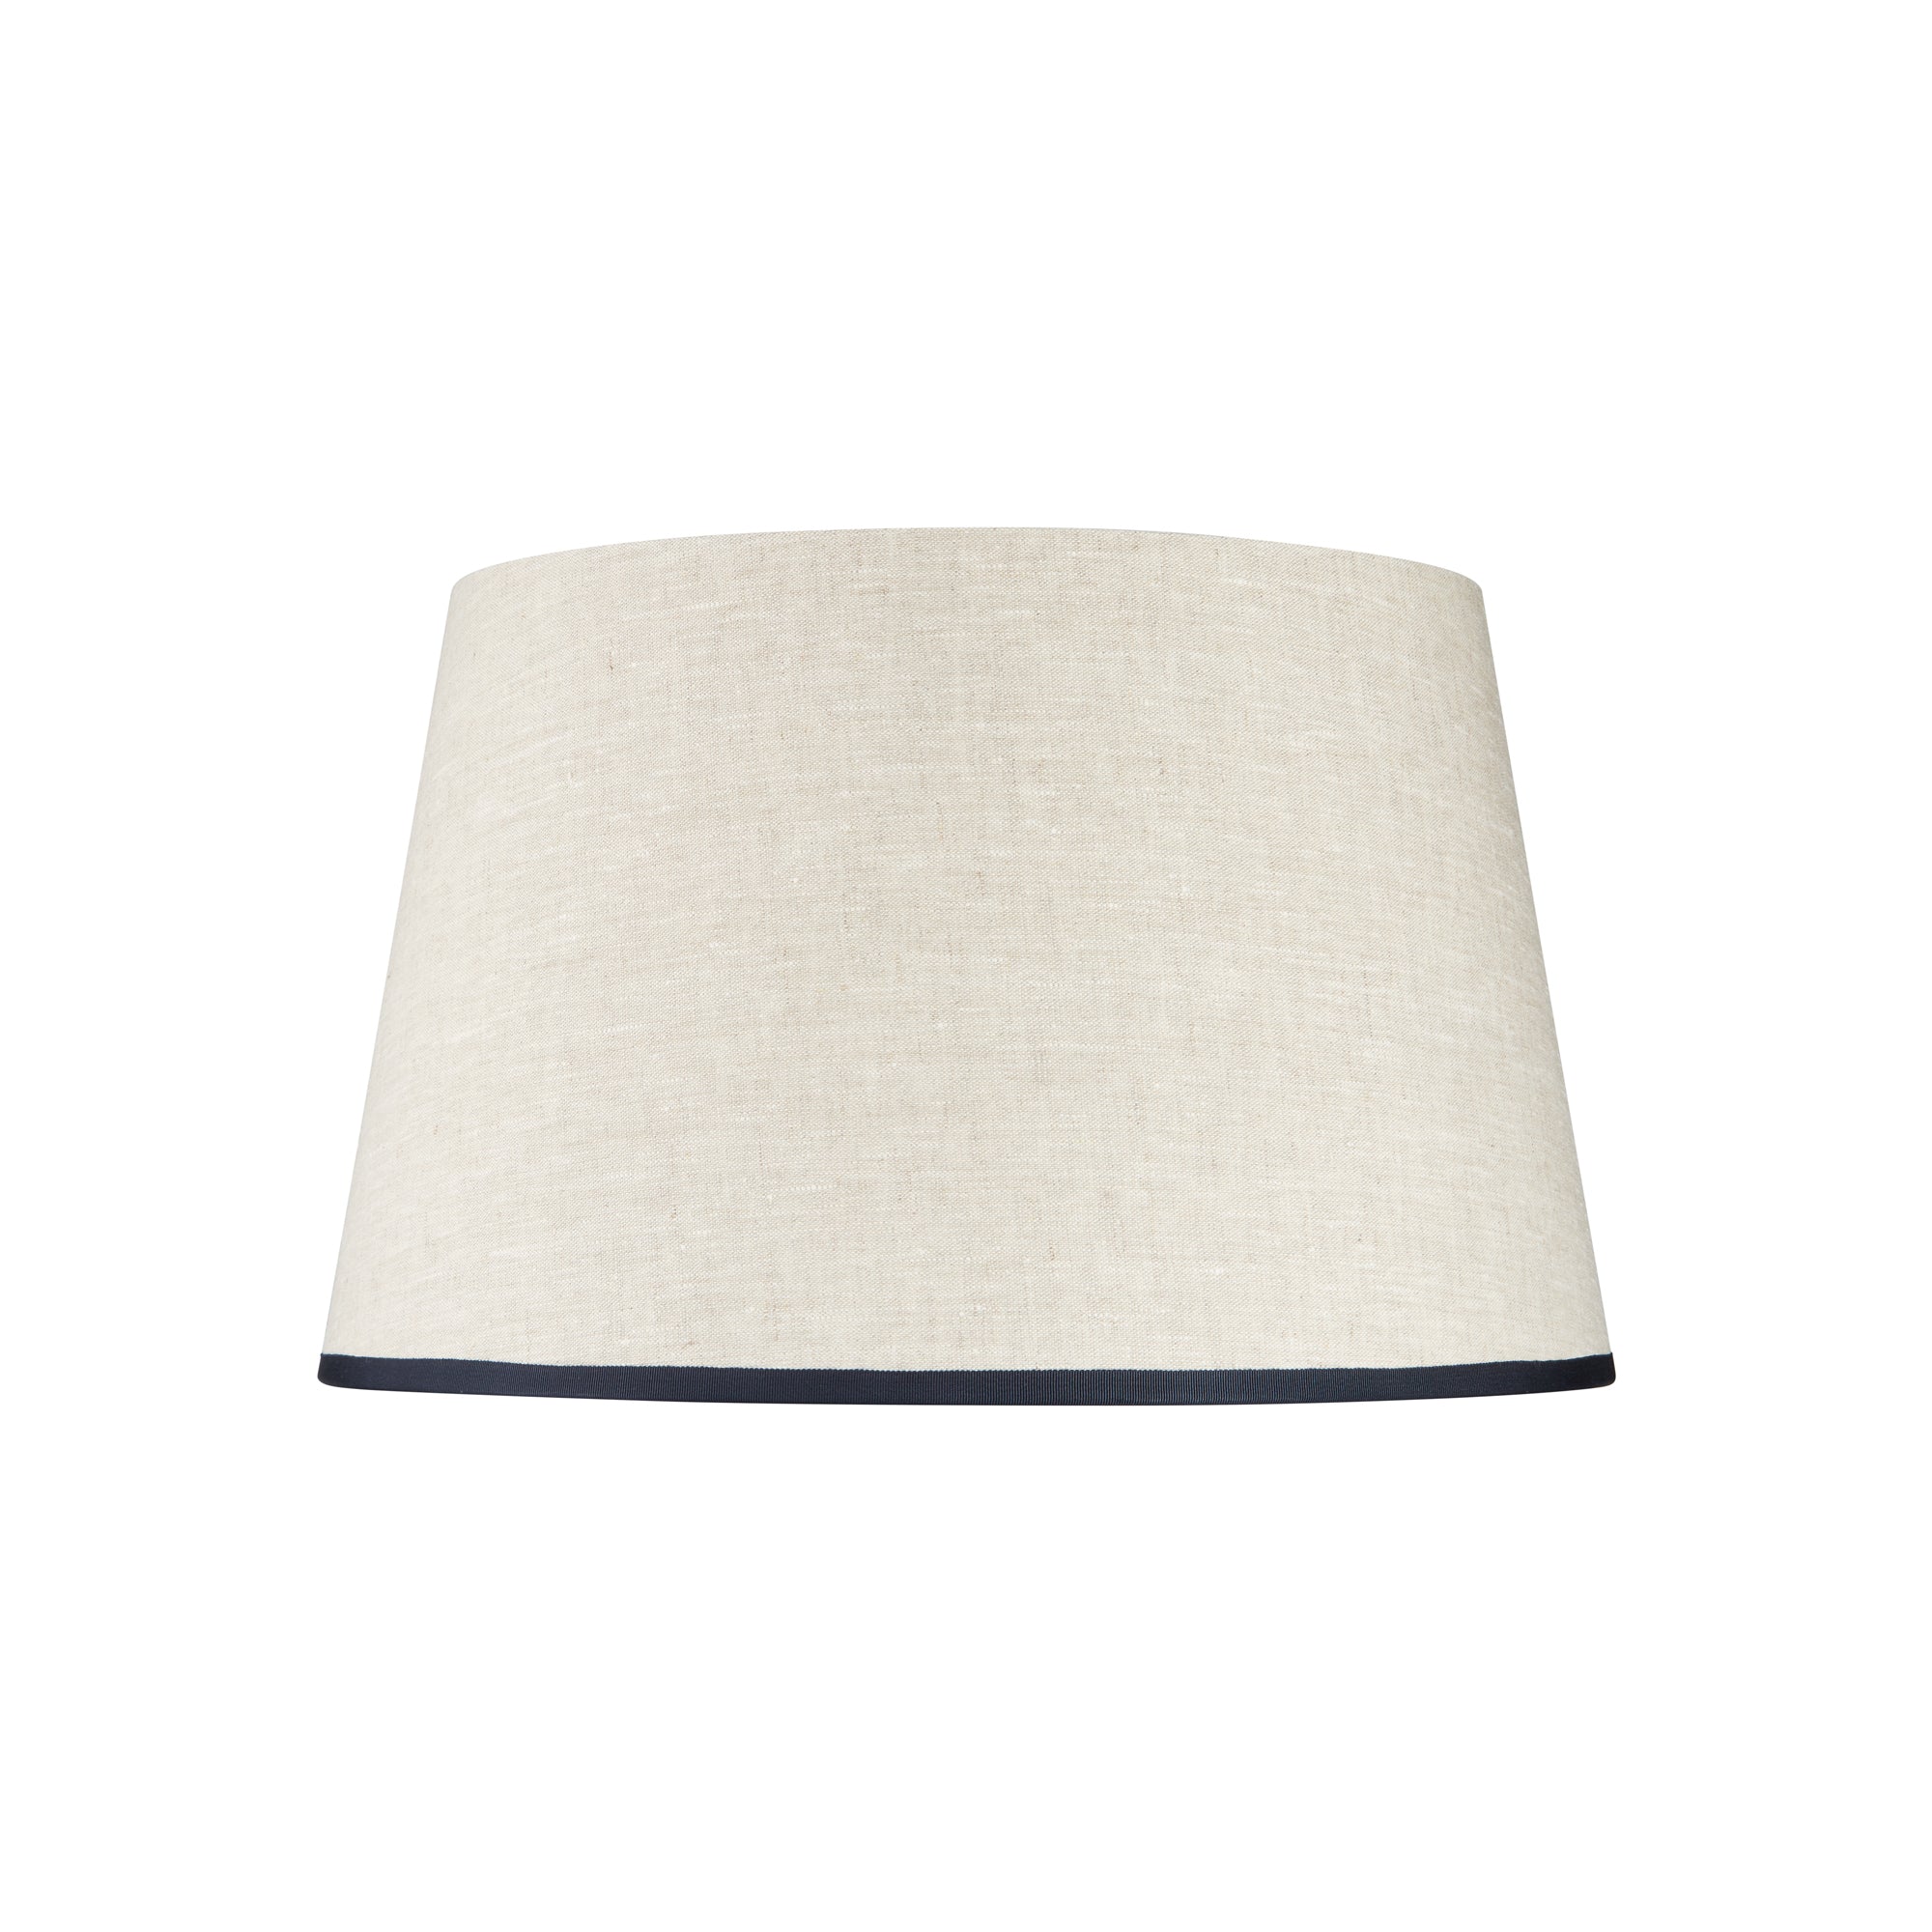 STRETCHED CREAM LINEN LAMPSHADE WITH RIBBED SINGING THE BLUES TRIM